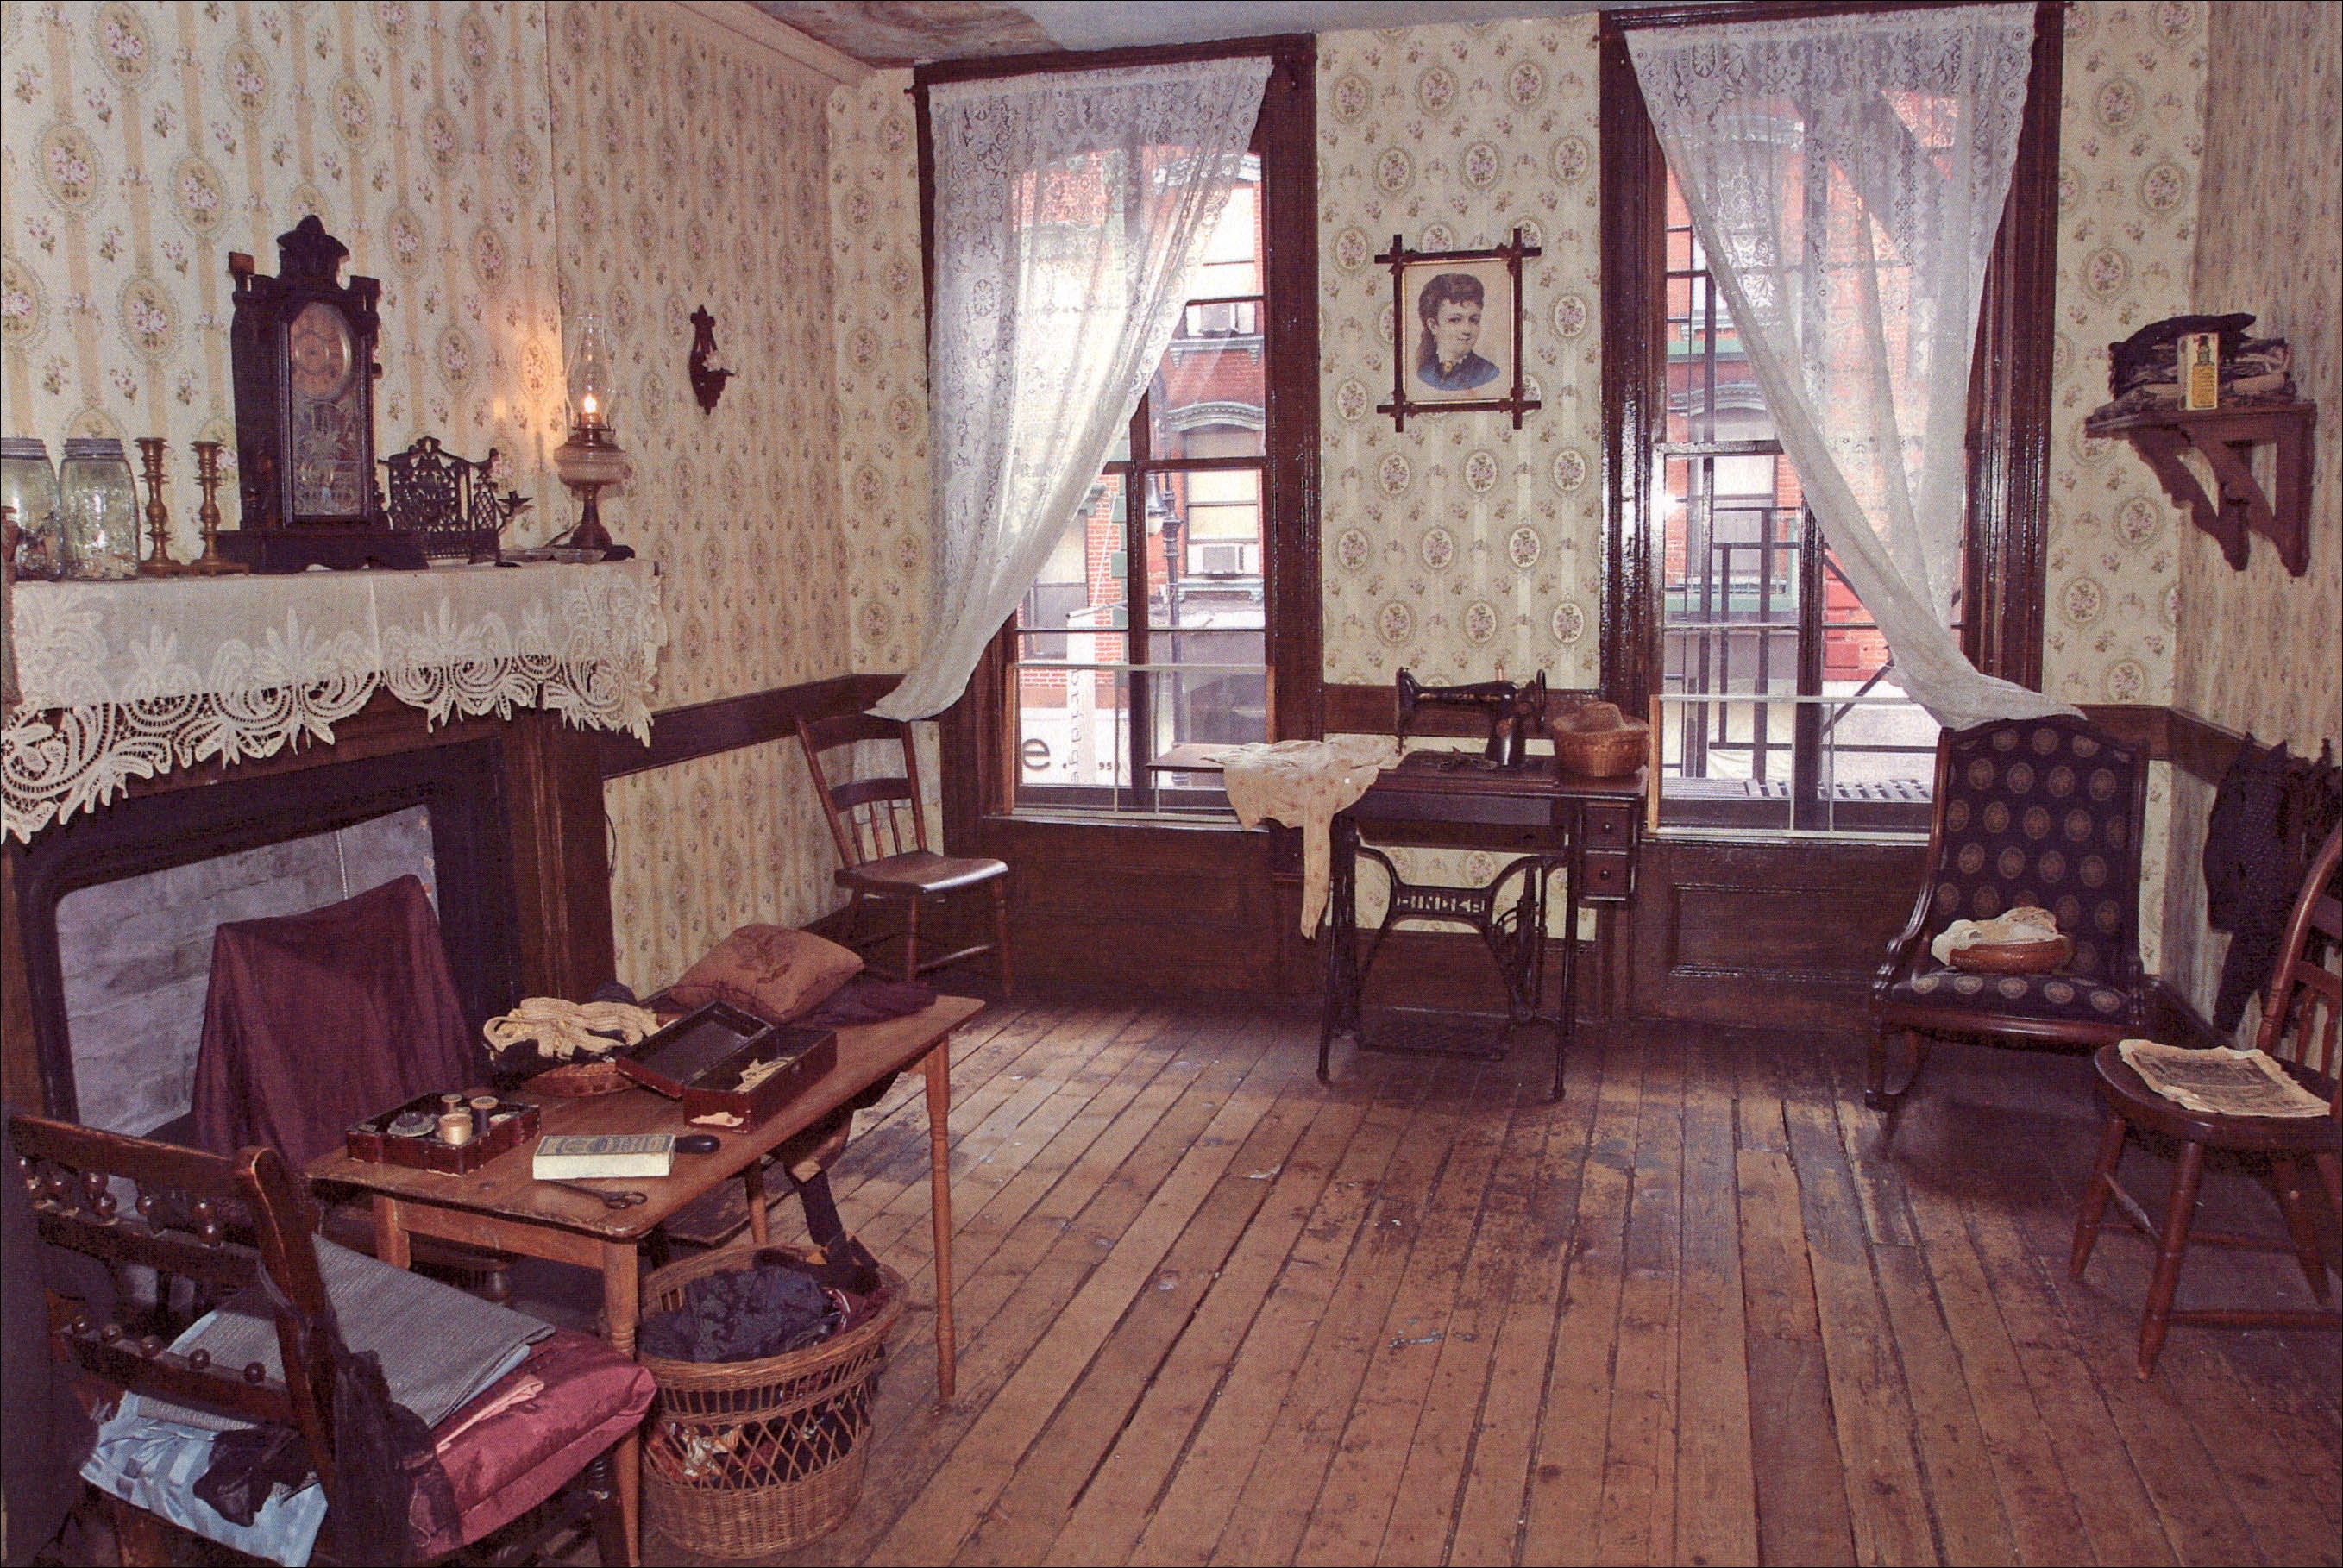 The Gumpertz family apartment parlor in 97 Orchard Street, the Lower East Side Tenement Museum’s landmark tenement building. Photo courtesy: Tenement Museum